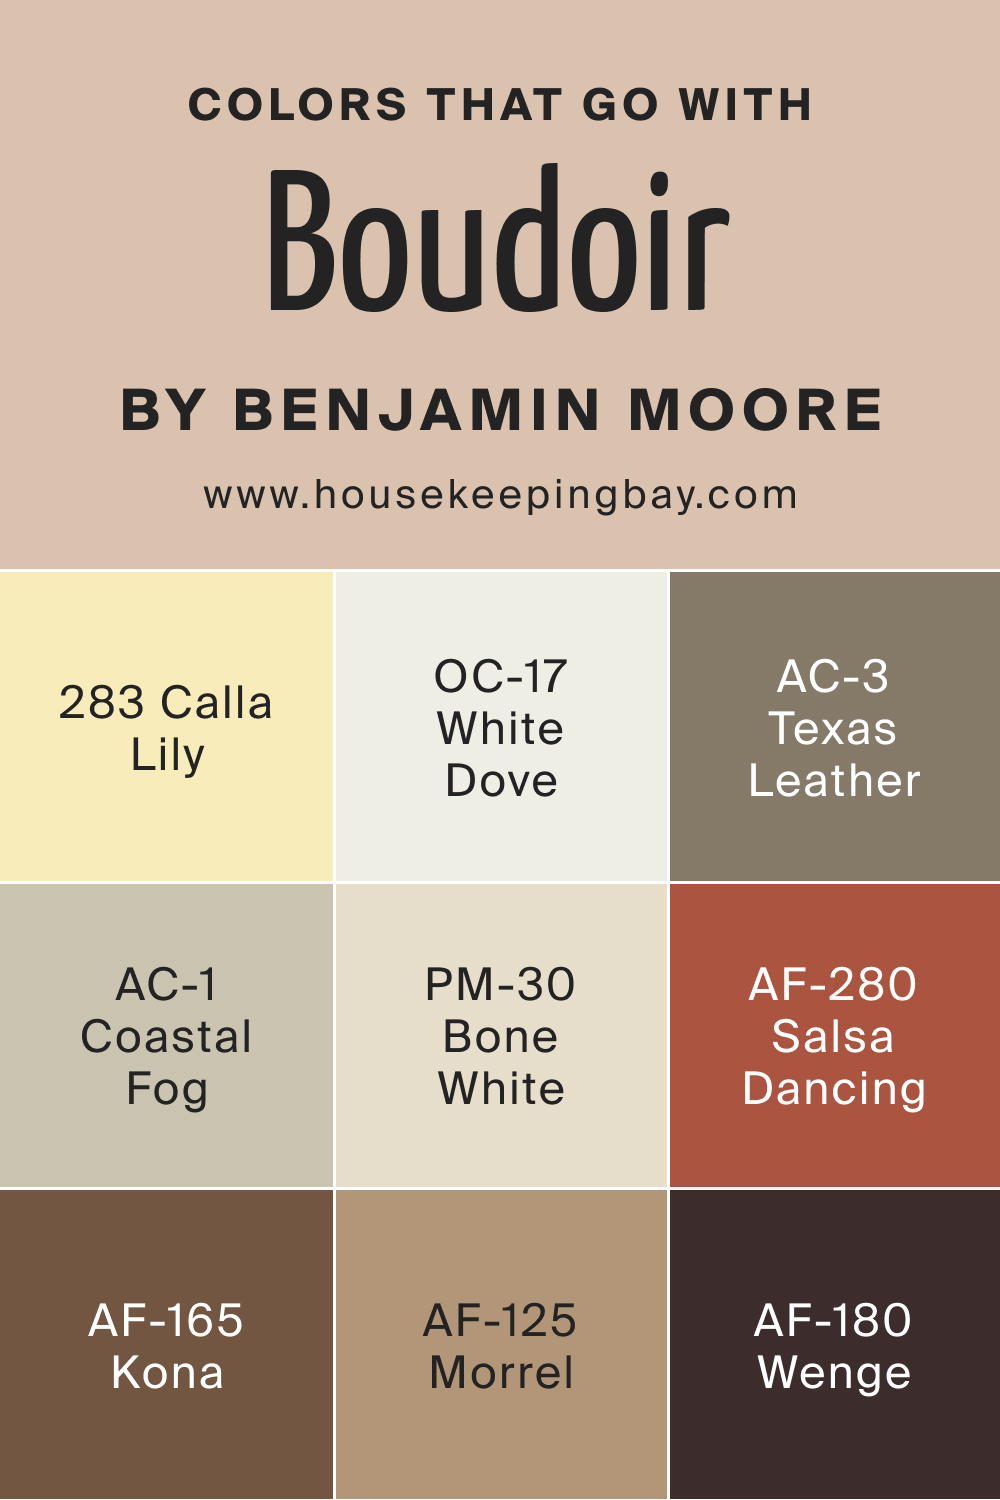 Colors that go with Boudoir AF 190 by Benjamin Moore